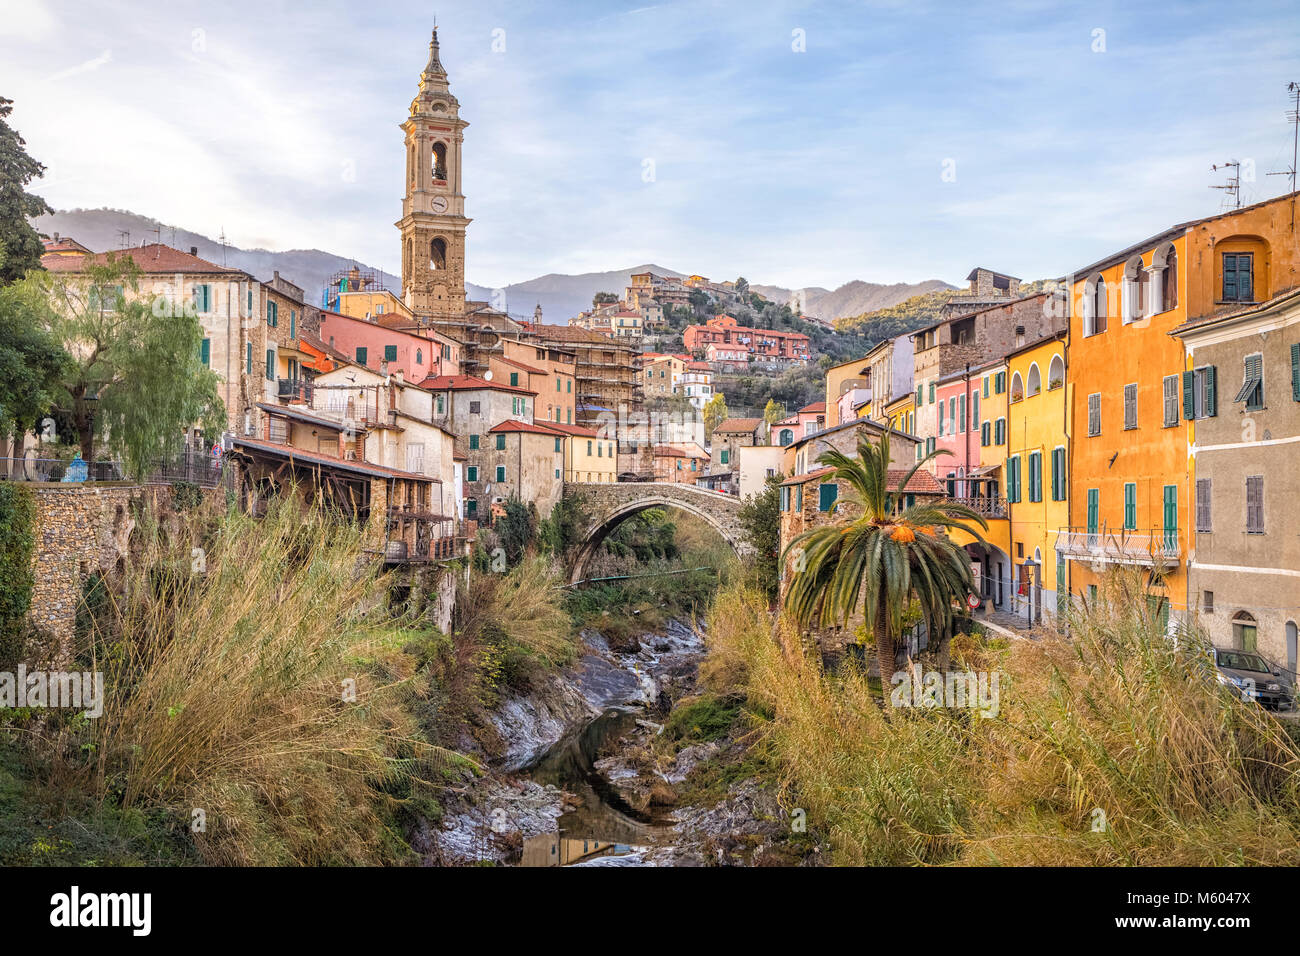 Cityscape of Dolcedo - small town located in Ligurian Alps, Italy Stock Photo